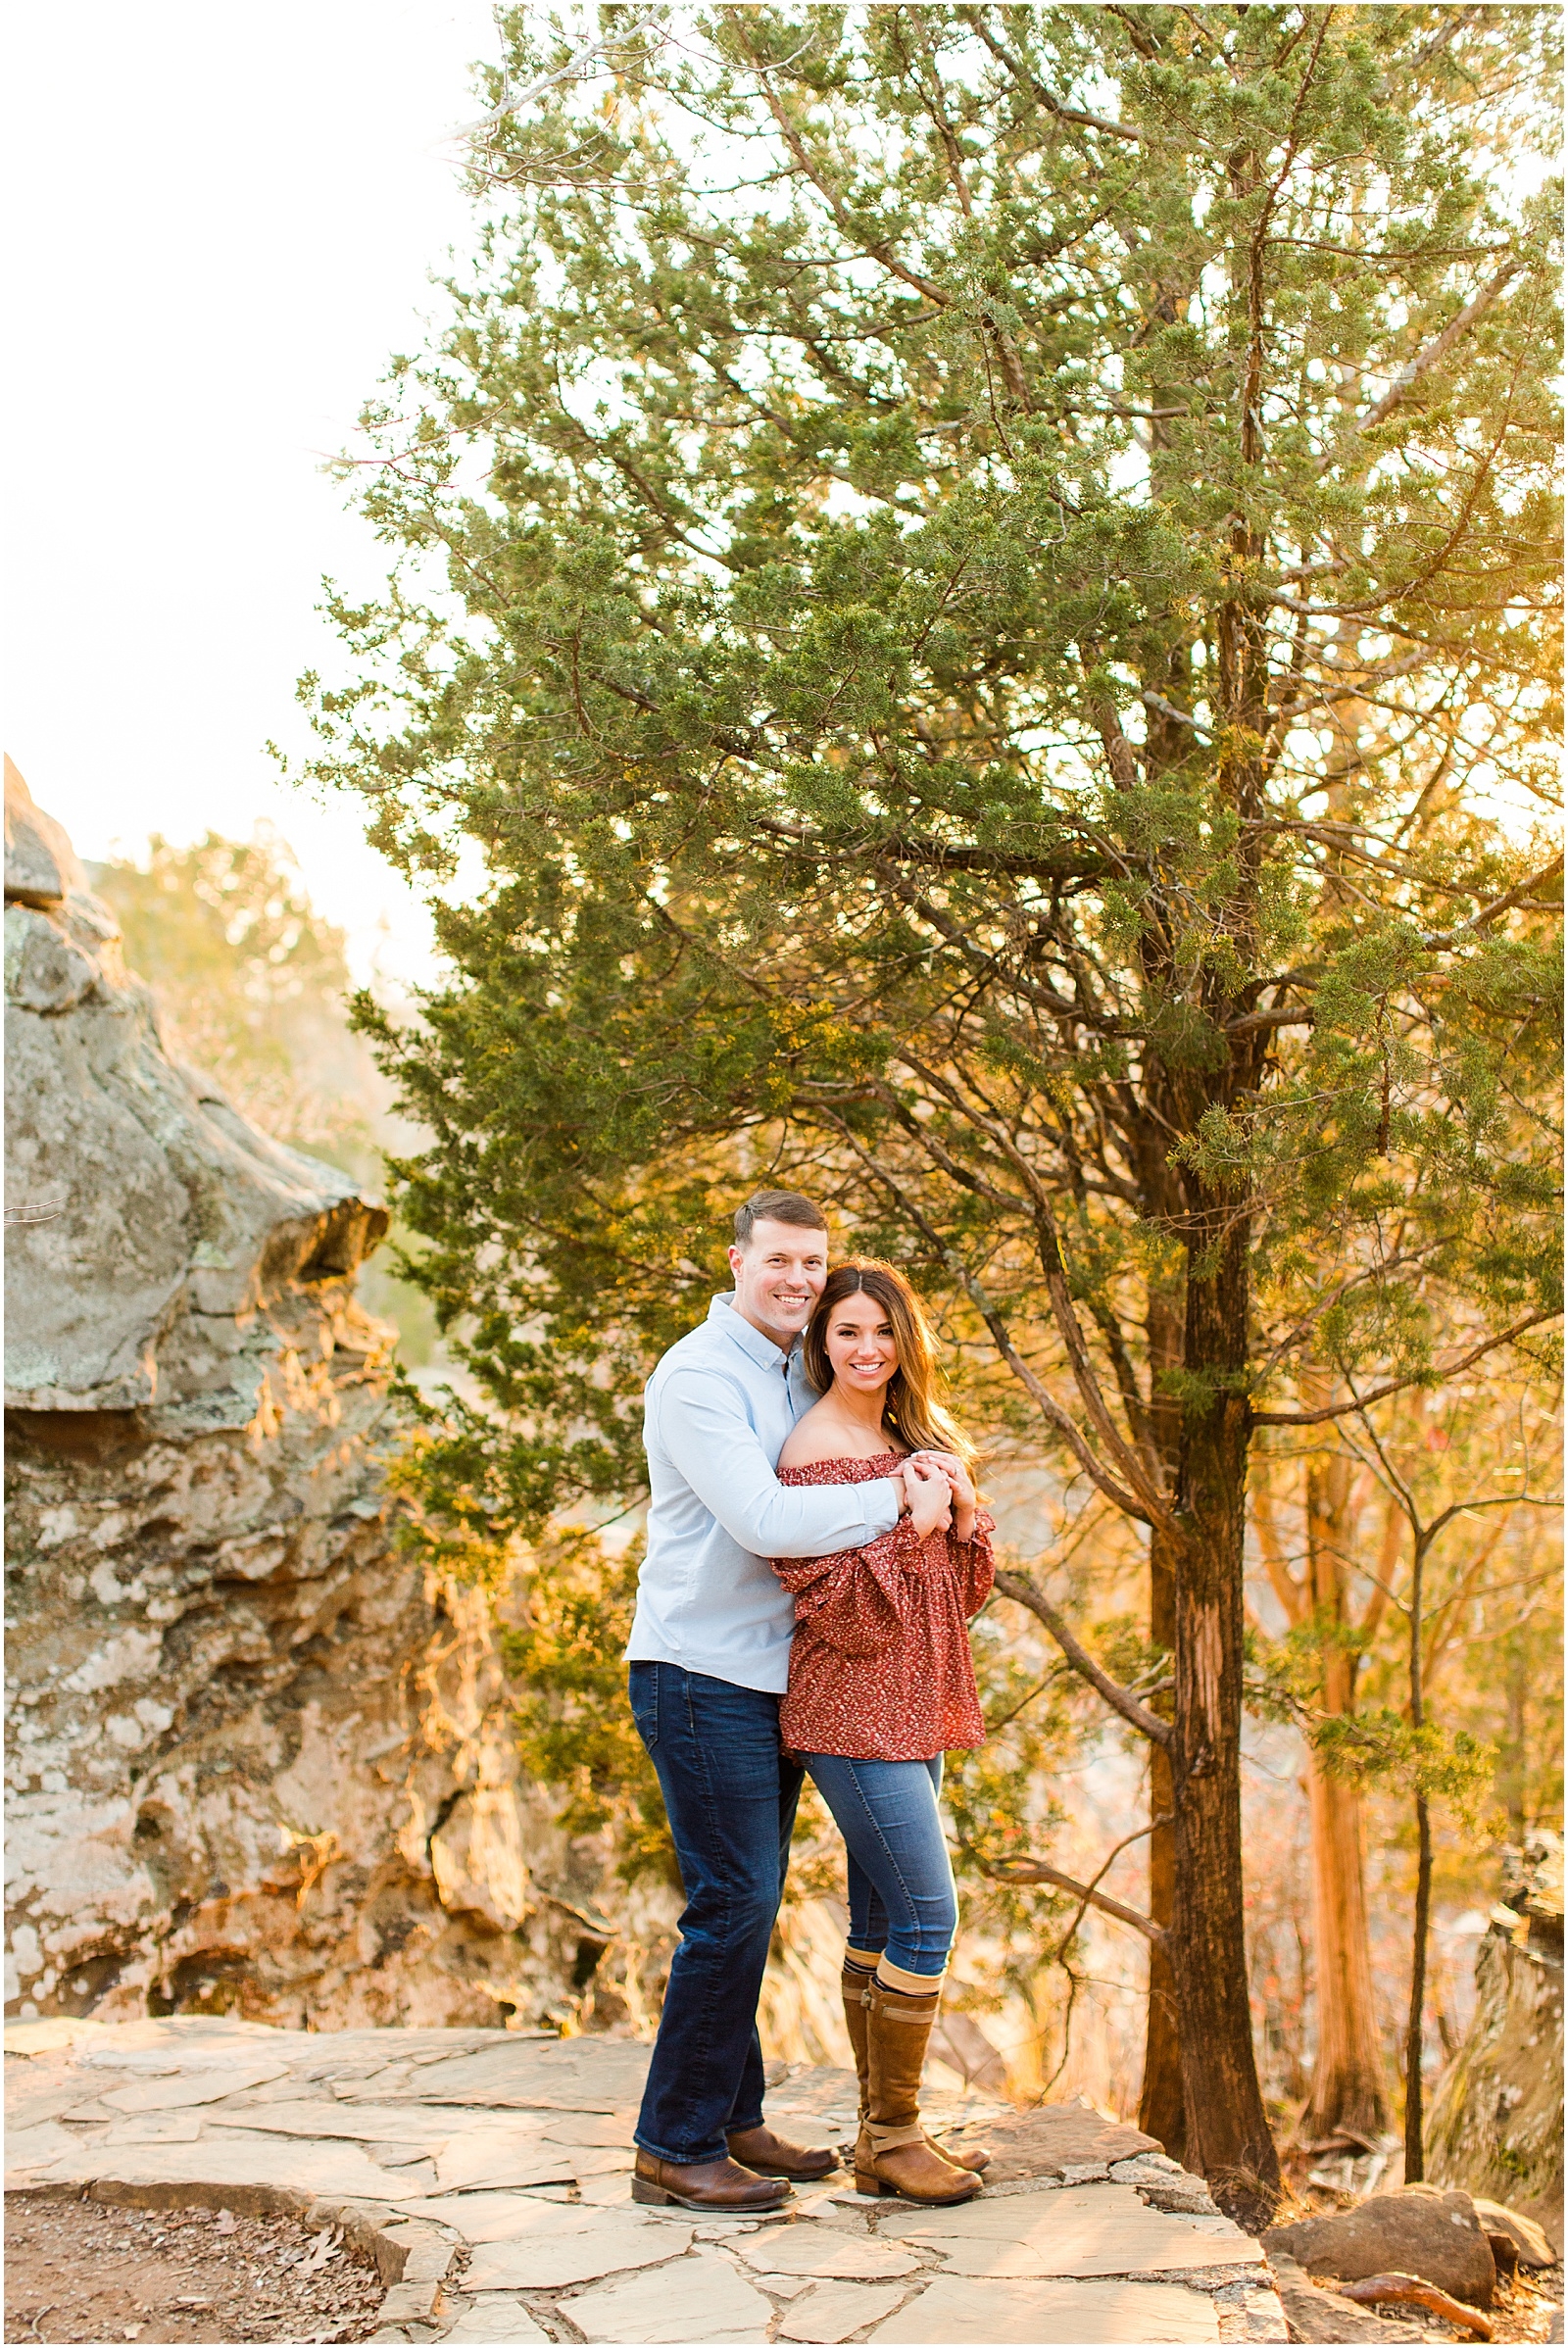 A Sunny Garden of the Gods Engagement Session | Shiloh and Lee | Bret and Brandie Photography073.jpg